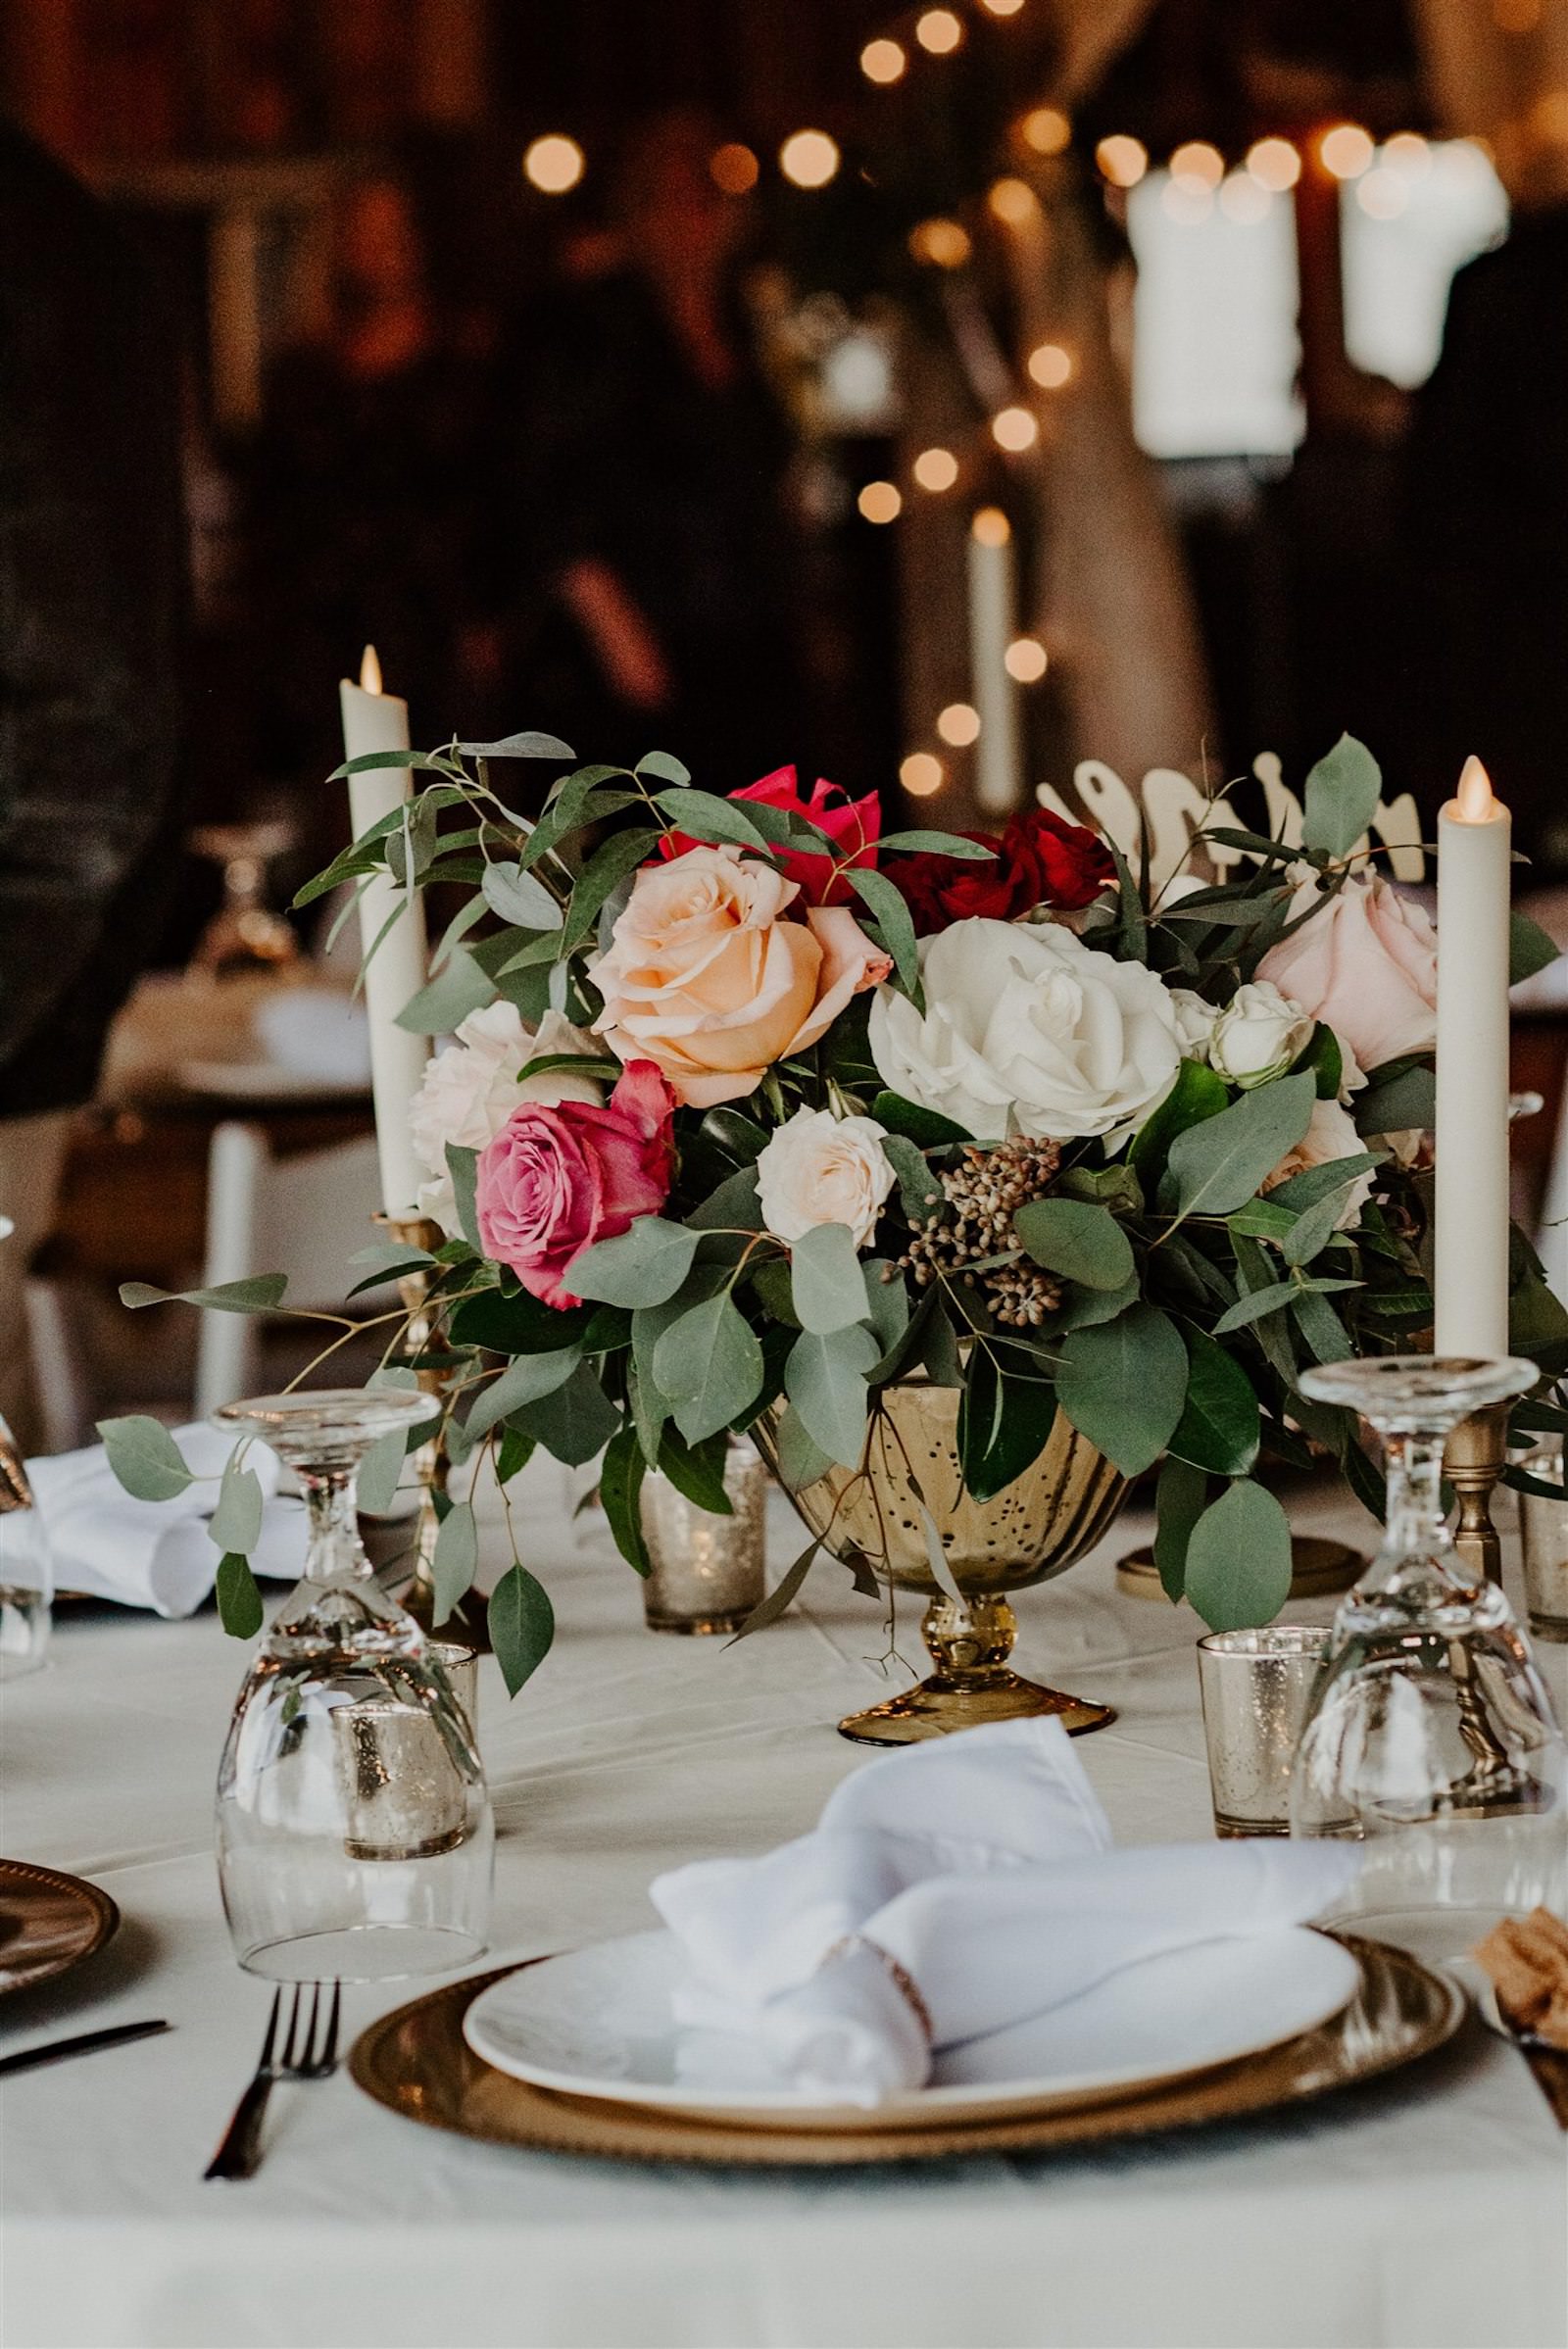 Rustic Barn Tampa Wedding Gold Compote Vase Centerpieces with Blush Pink and Deep Red Burgundy Roses and Eucalyptus Greenery | Reception Tables with Ivory Champagne Linens and Taper Candlestick Candles | Tampa Wedding Florist Monarch Events and Designs